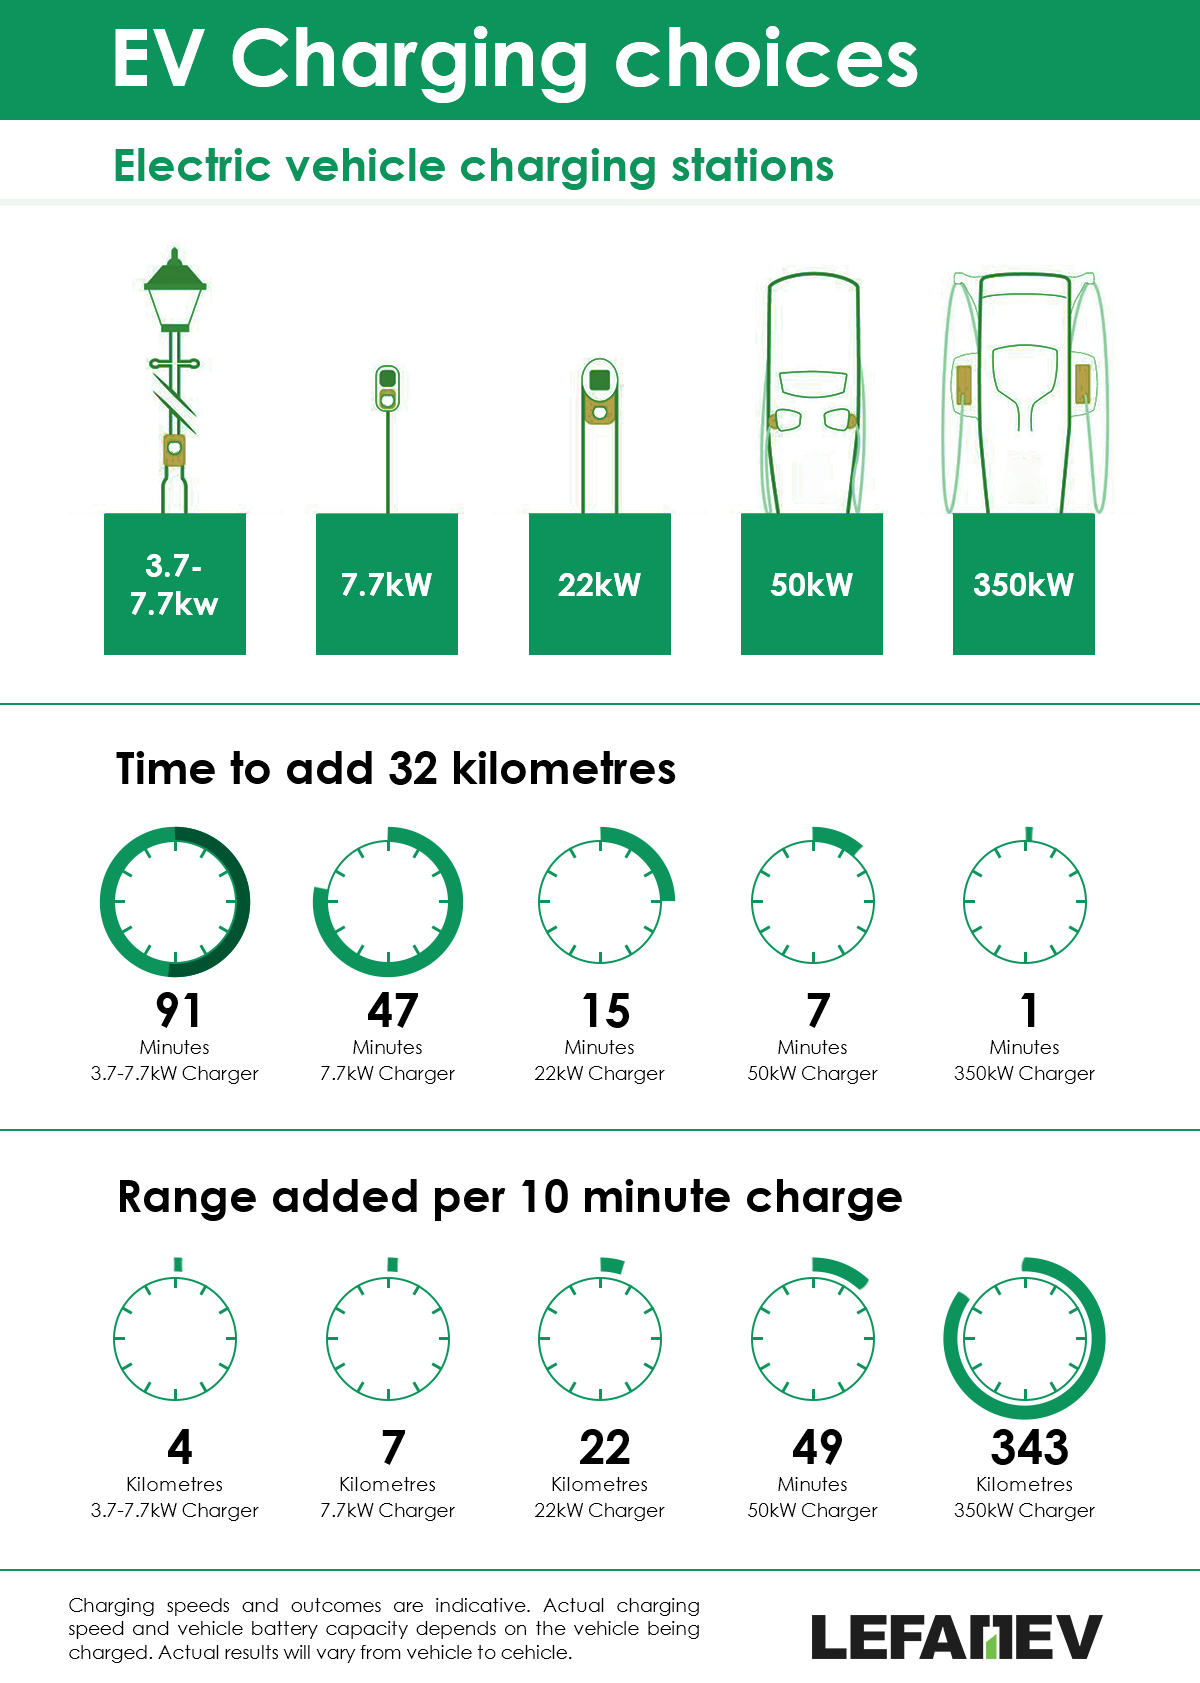 How to Choose an EV Charging Station?